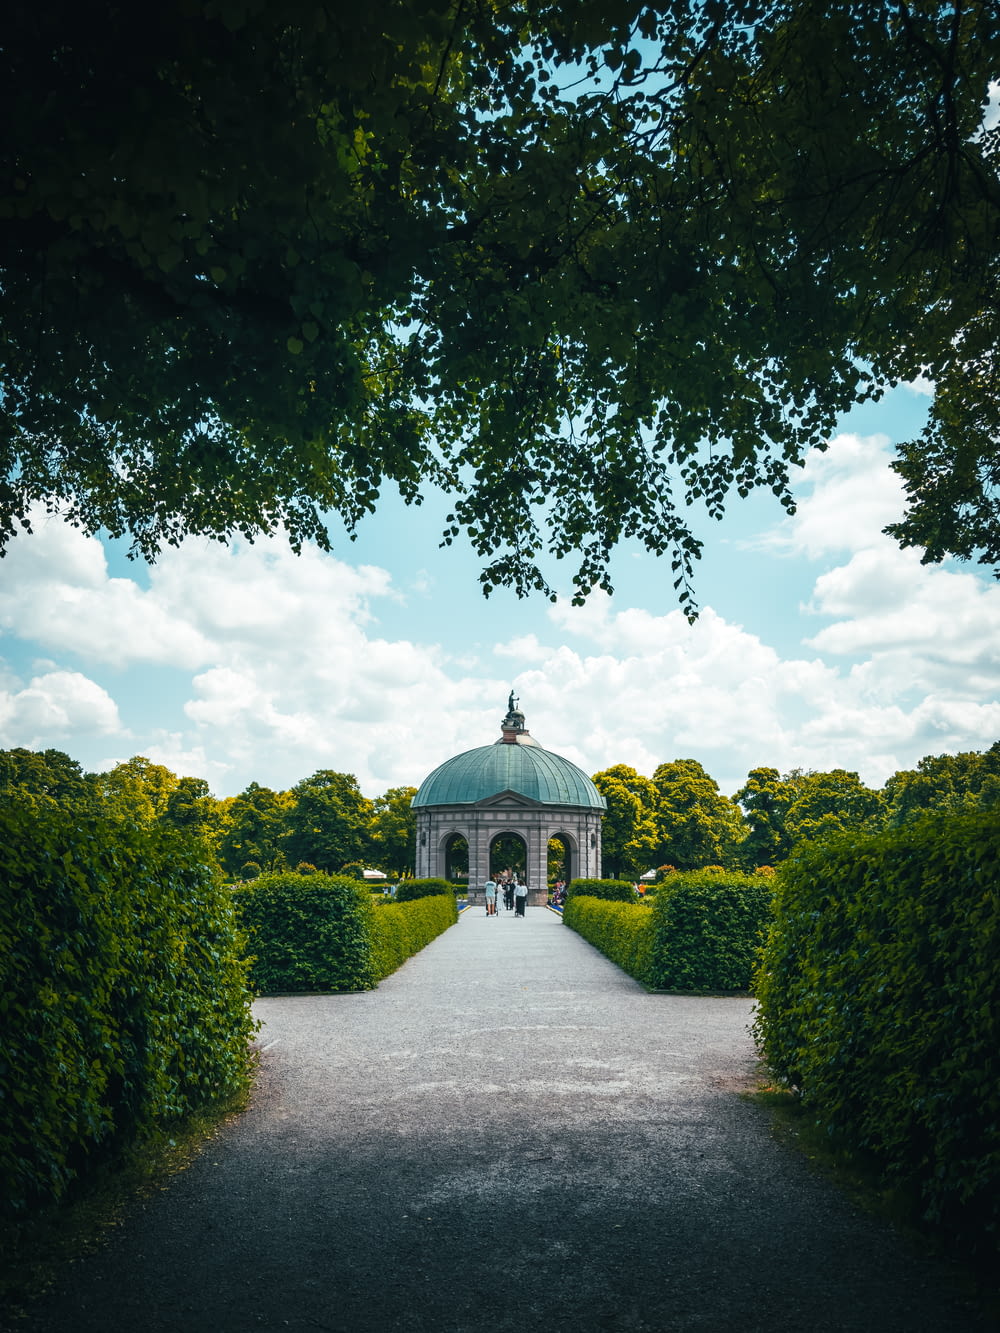 a gazebo surrounded by hedges and trees on a sunny day